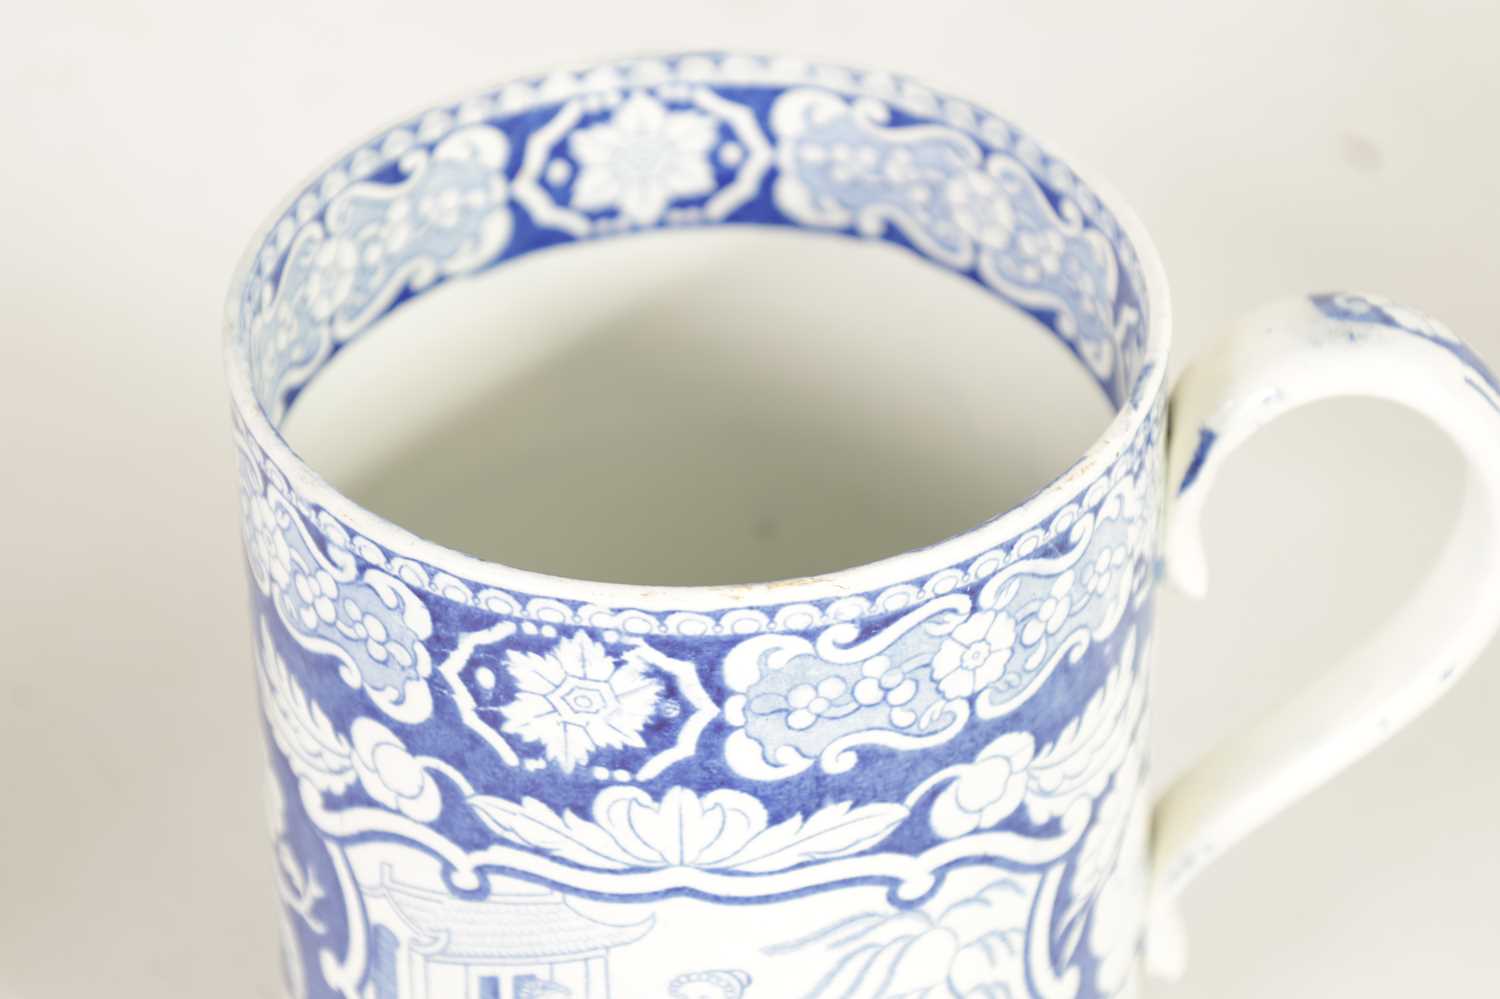 A EARLY 19TH CENTURY ORIENTAL STYLE PEARL WEAR MUG - POSSIBLY SPODE - Image 5 of 8